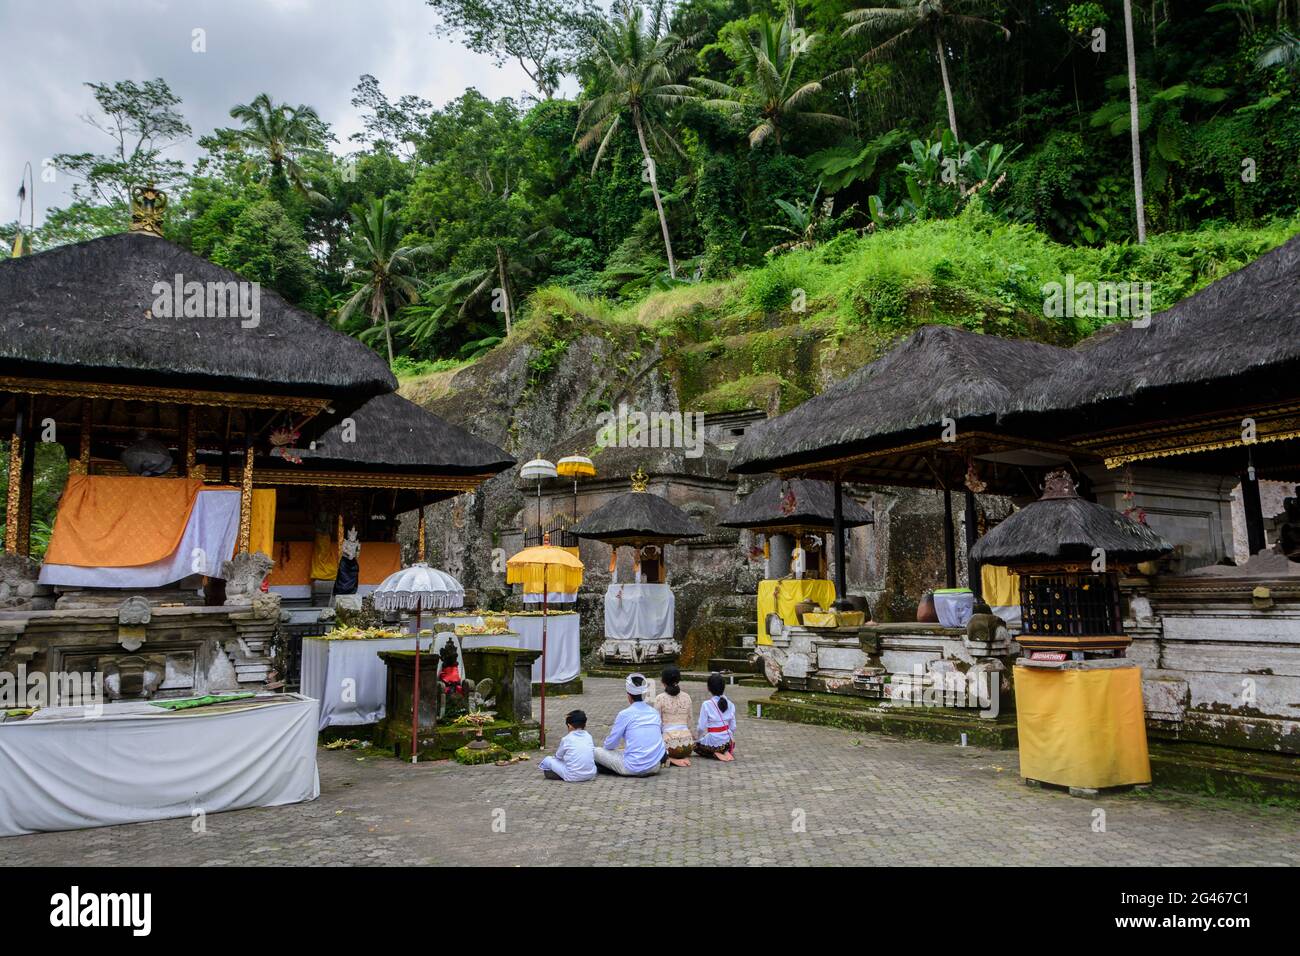 Worshippers performing a puja at the Gunung Kawi temple and funerary complex near Tampaksiring, Bali, Gianyar Regency, Indonesia Stock Photo